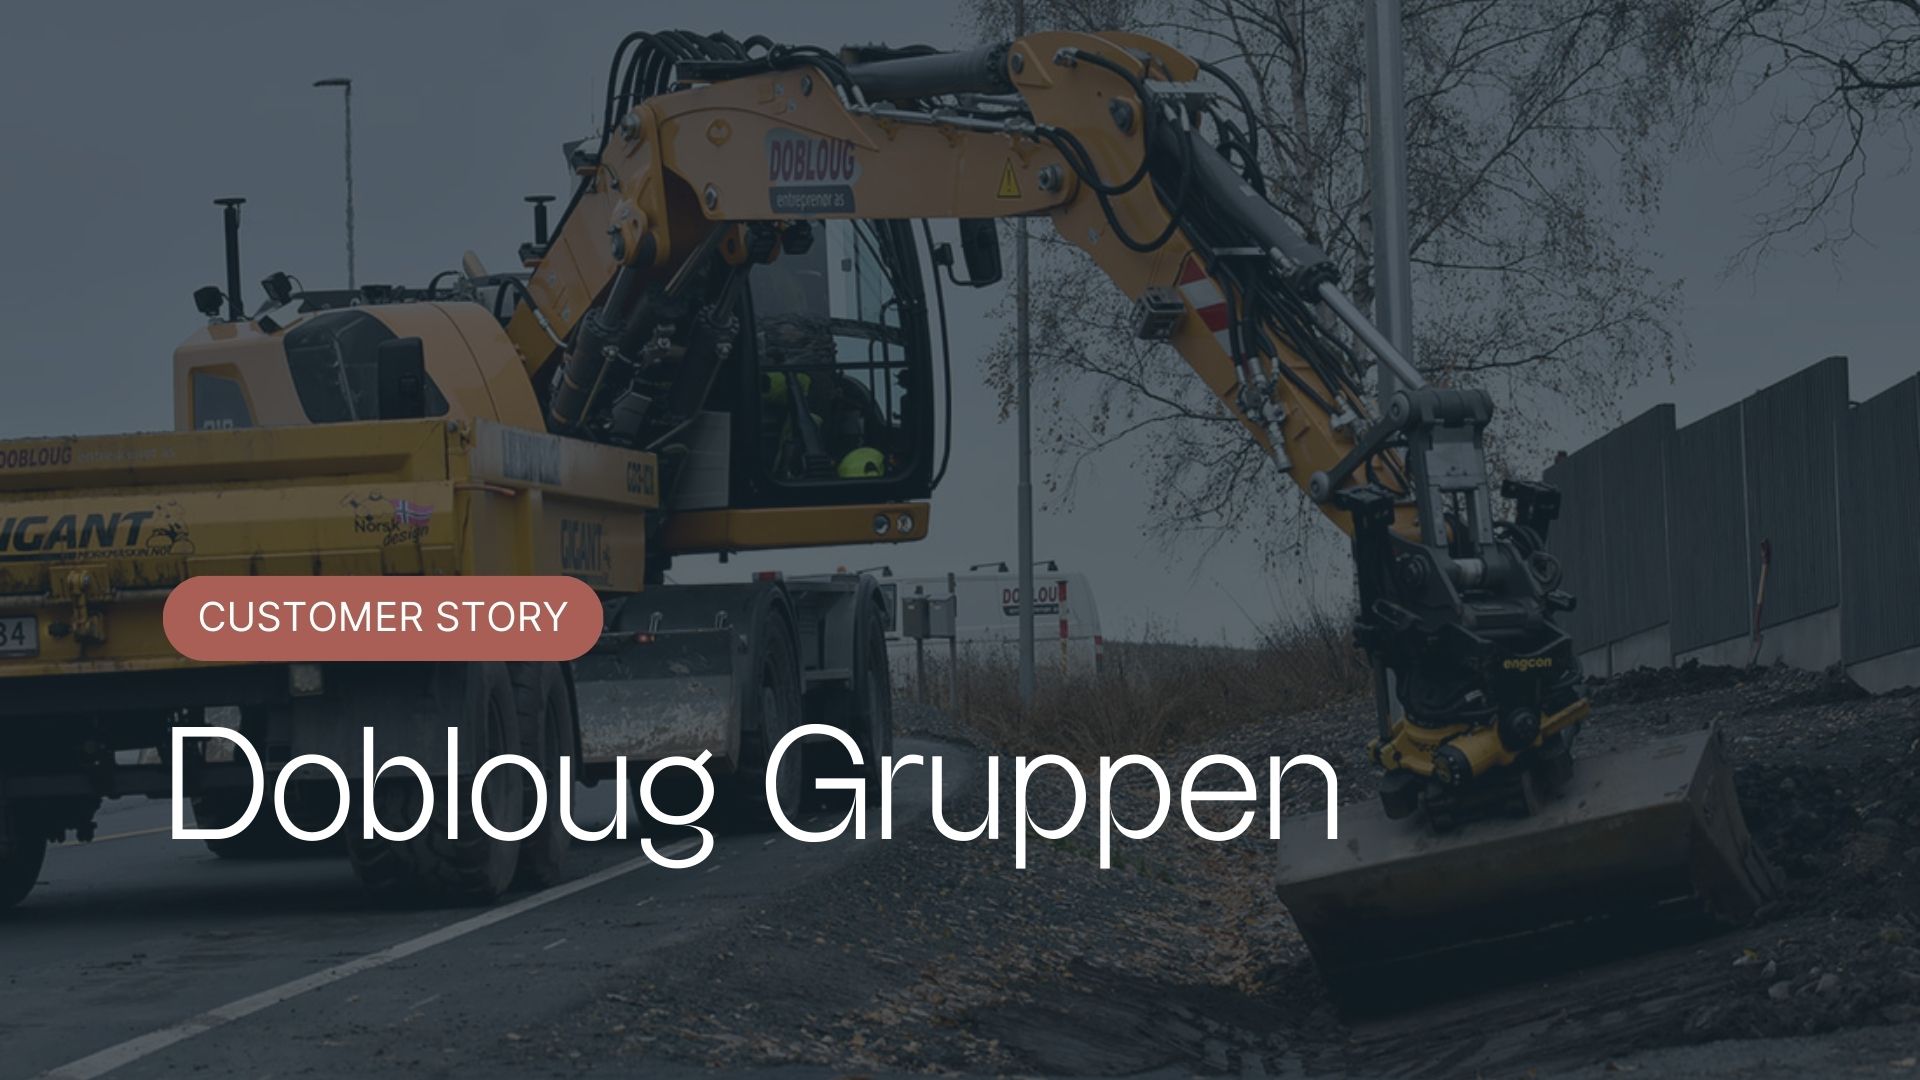 From fragmented infrastructure to efficient administration and control: When Dobloug Gruppen was faced with complex IT challenges after several acquisitions, they entered into a new operating agreement with Arribatec to ensure central control and a full overview.